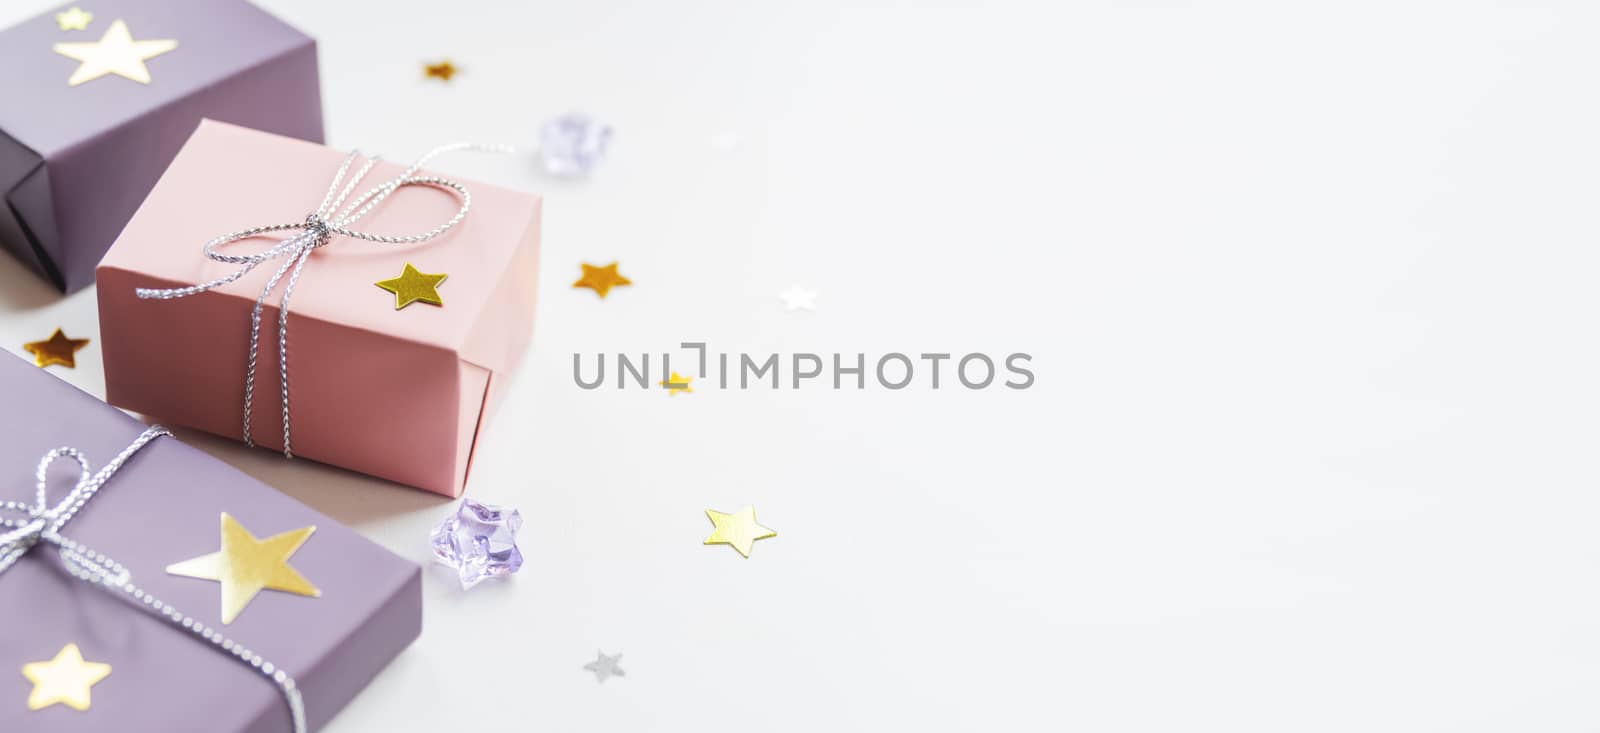 Banner with holiday presents. Gifts wrapped in pale pink and violet paper with silver ribbons and bow. Stars confetti and white copy space.